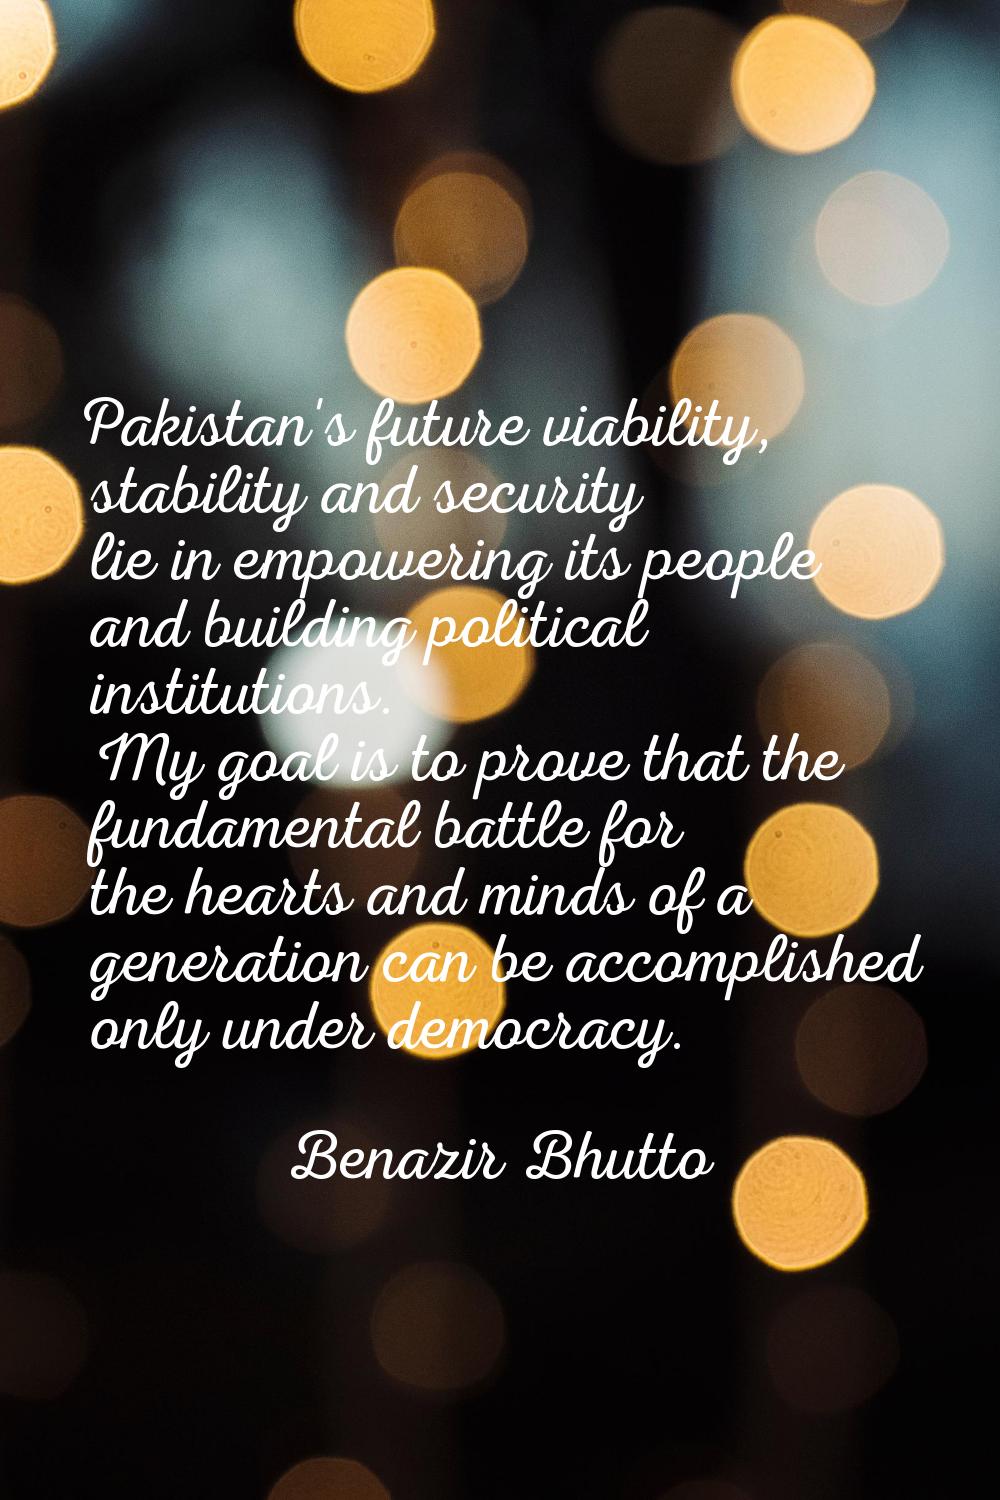 Pakistan's future viability, stability and security lie in empowering its people and building polit